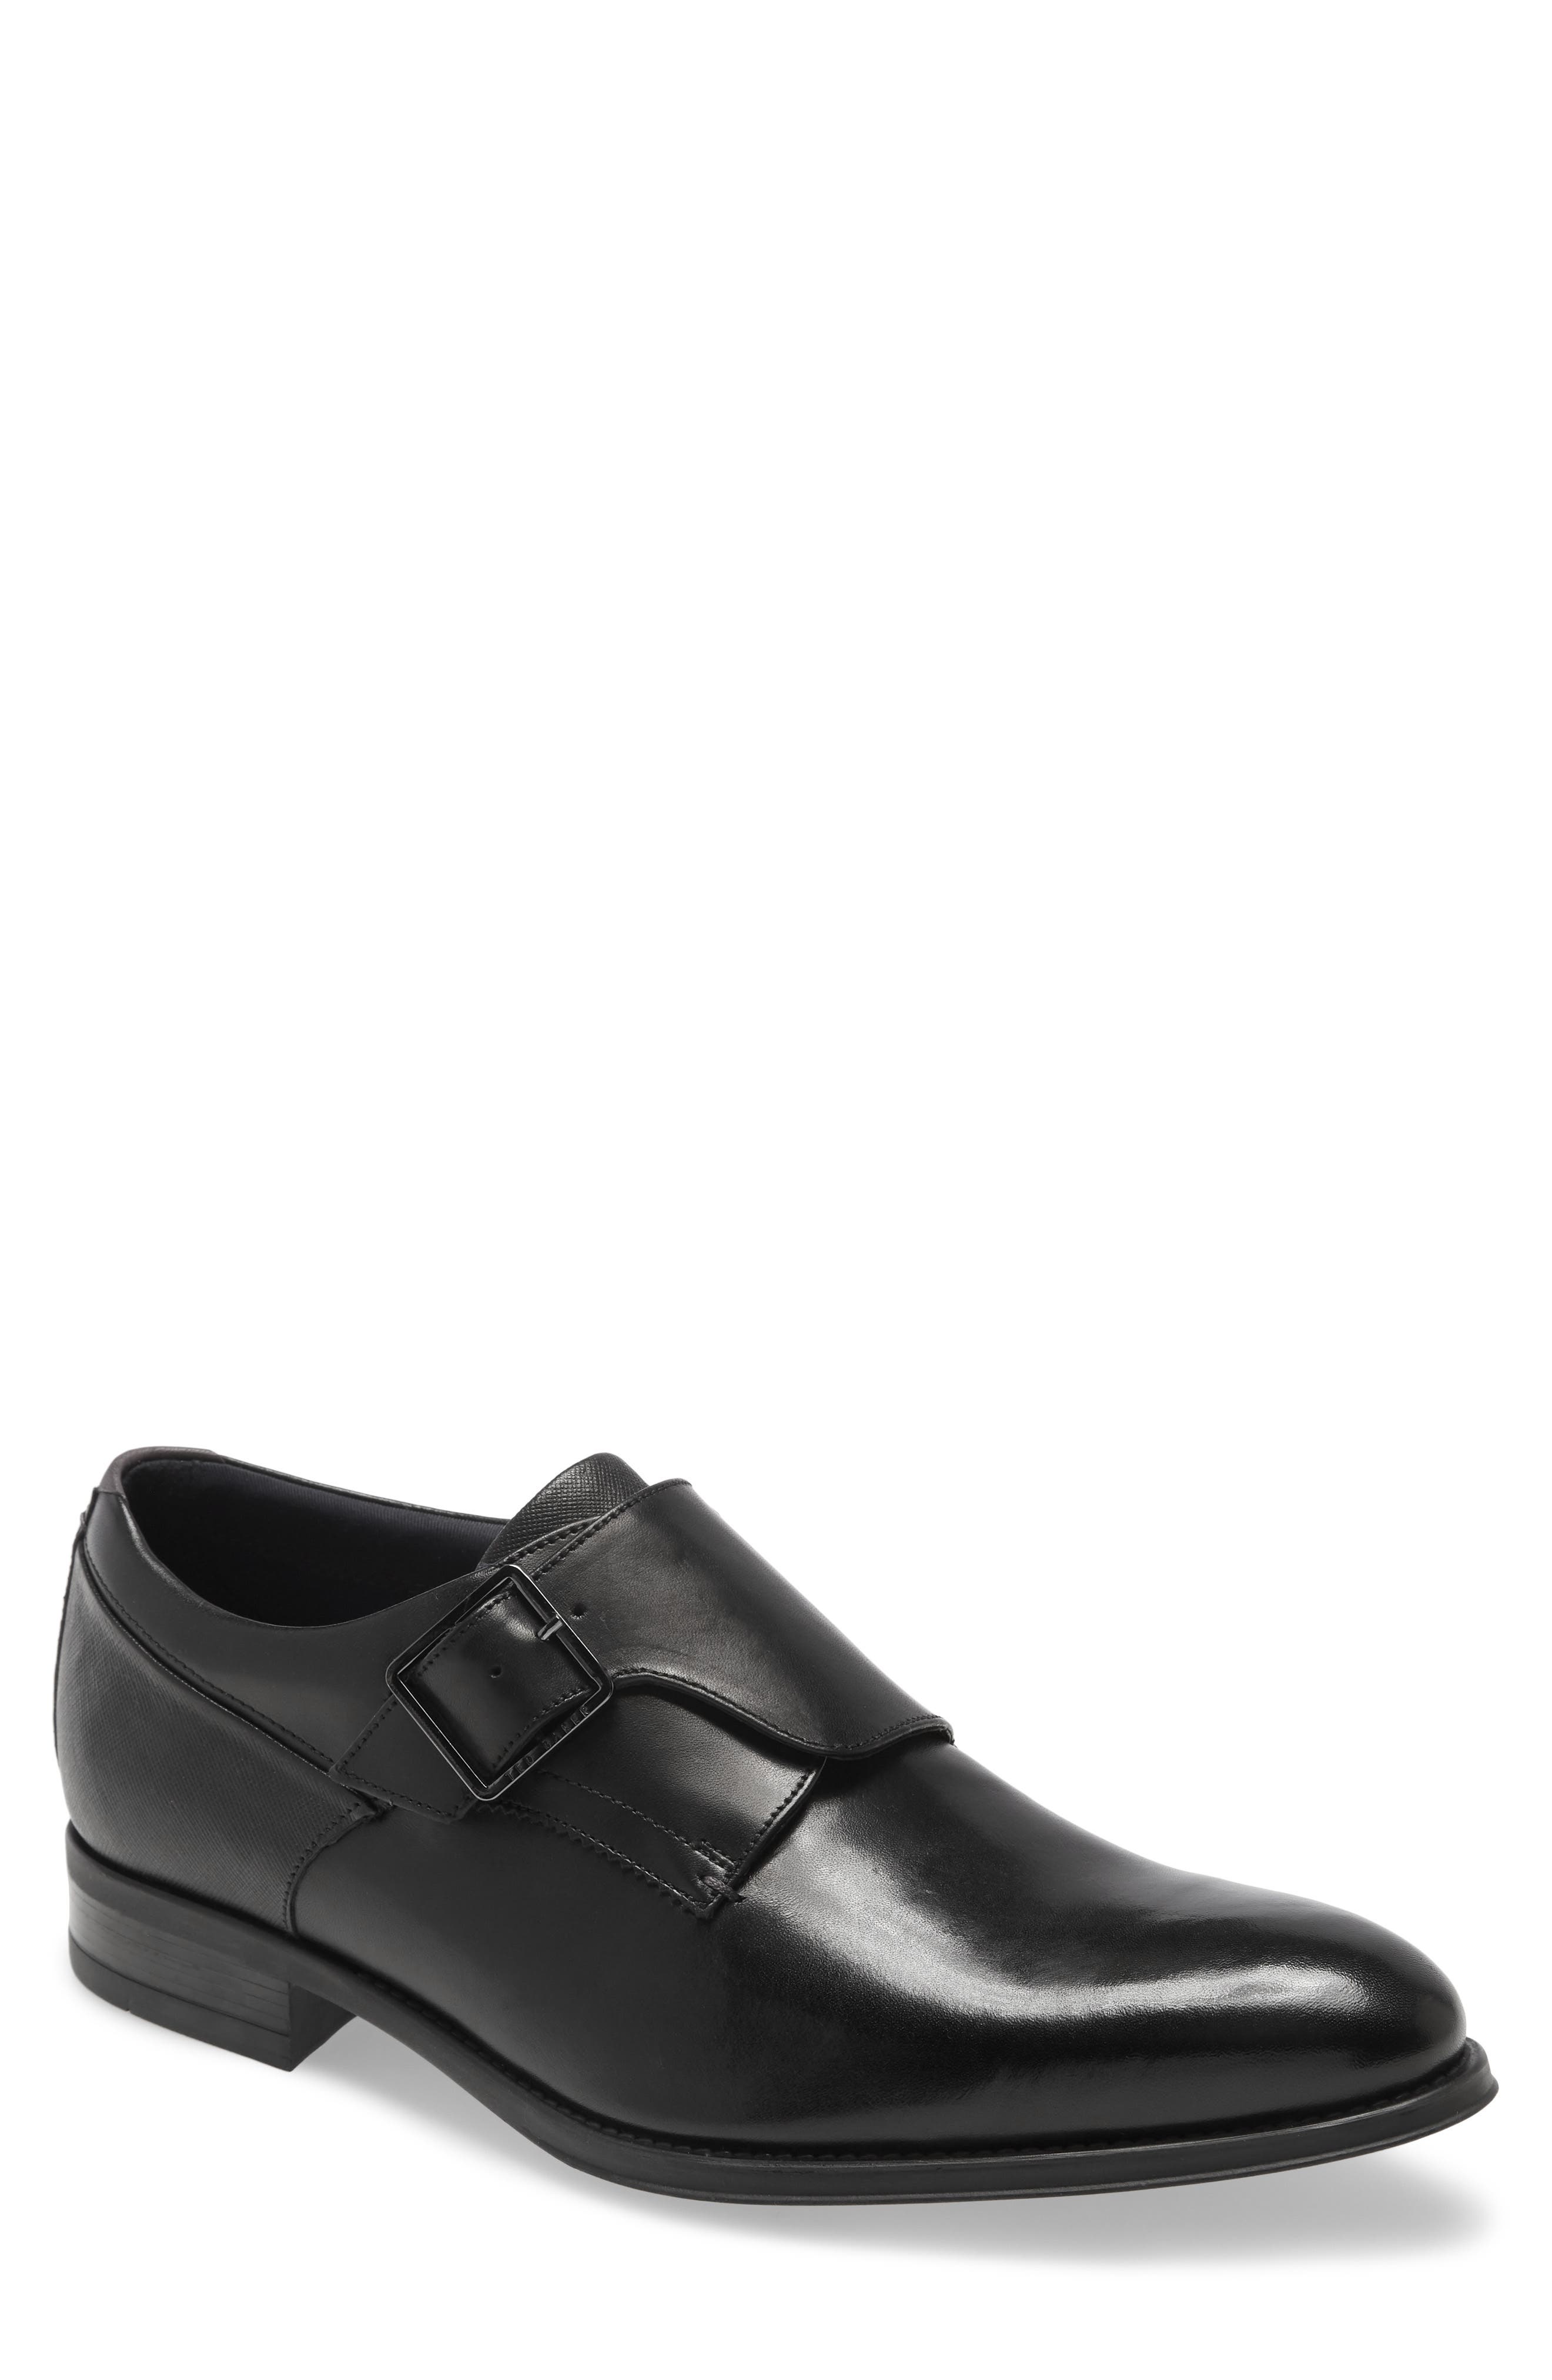 TED BAKER CARMO MONK STRAP SHOE,5059104753928